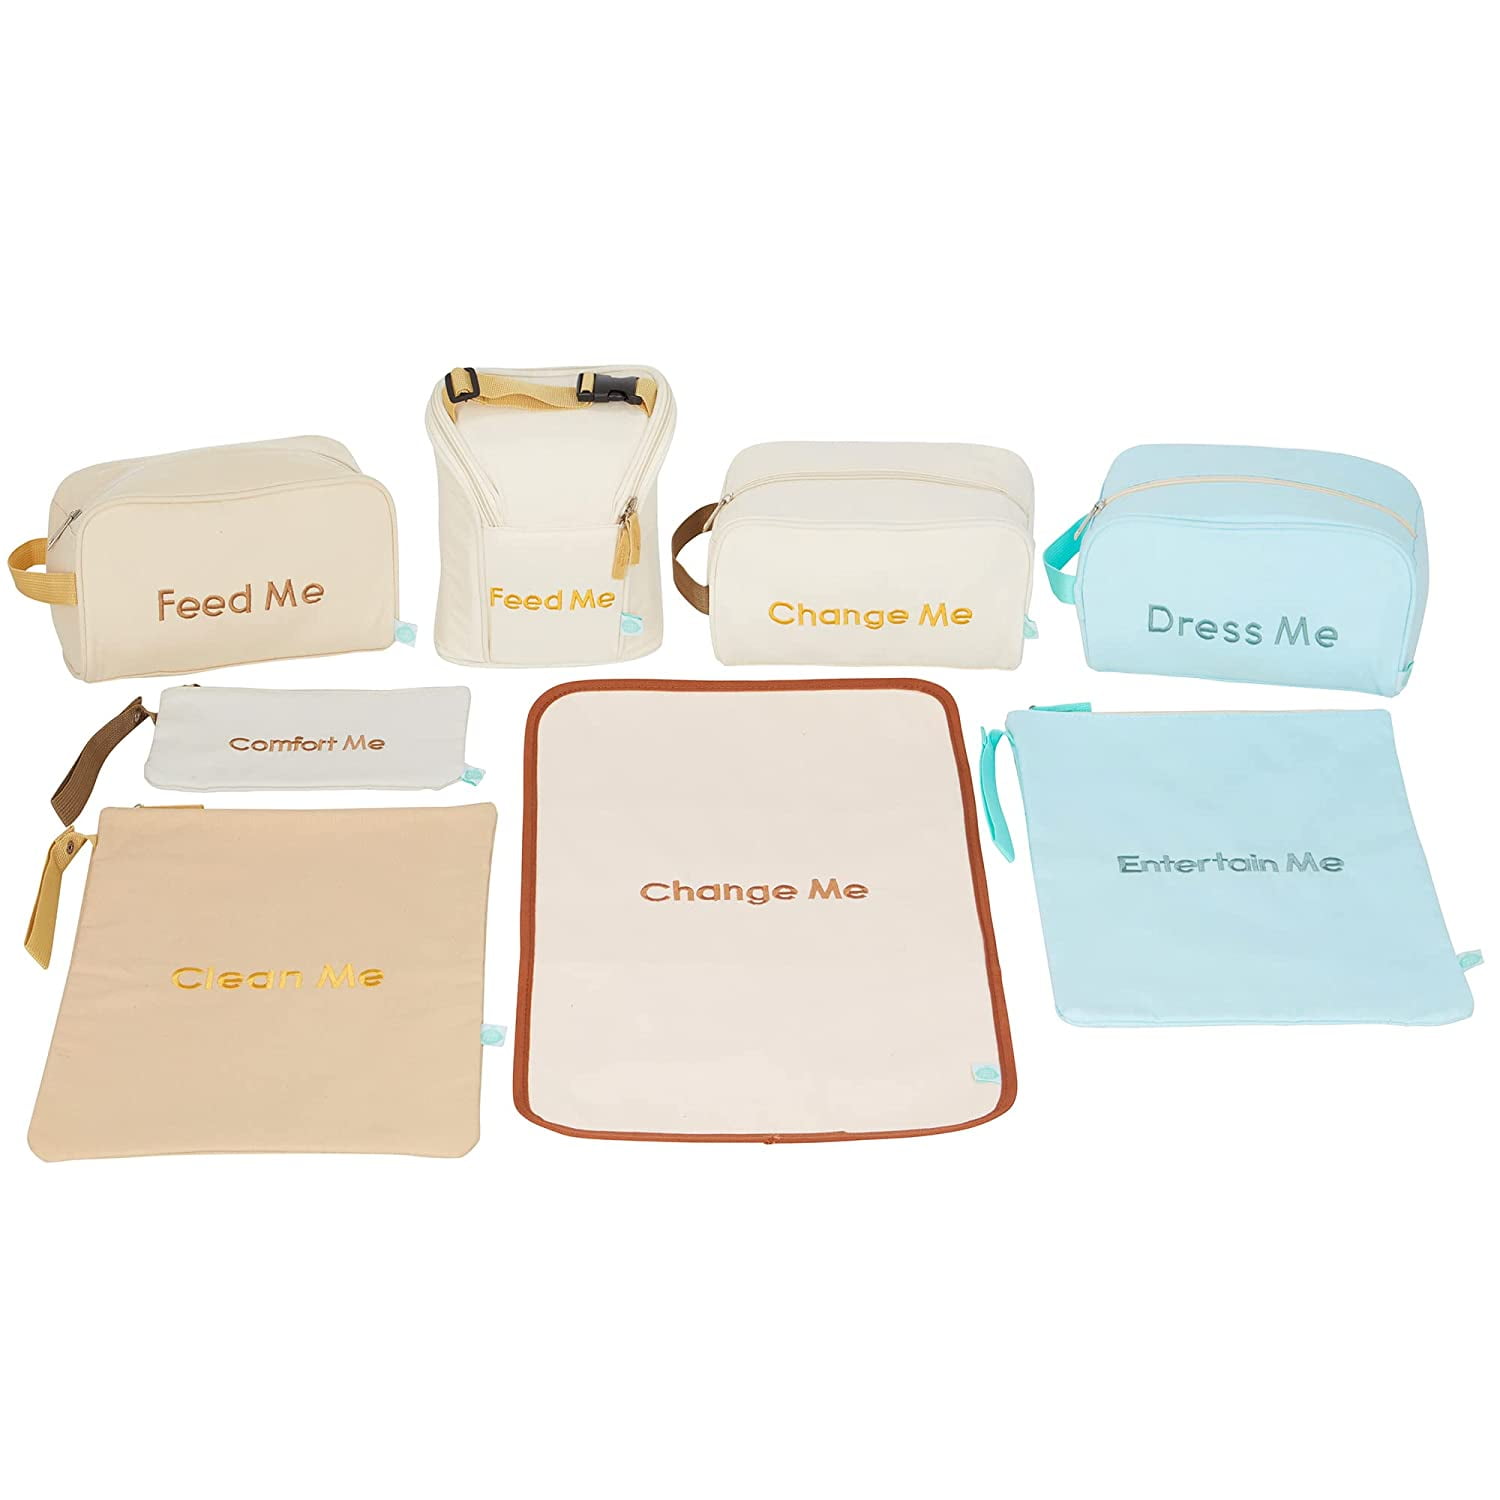 Easy Baby Travelers Packing Cubes & Pouches for Baby Items, 4 Pack, Sedona, Beige